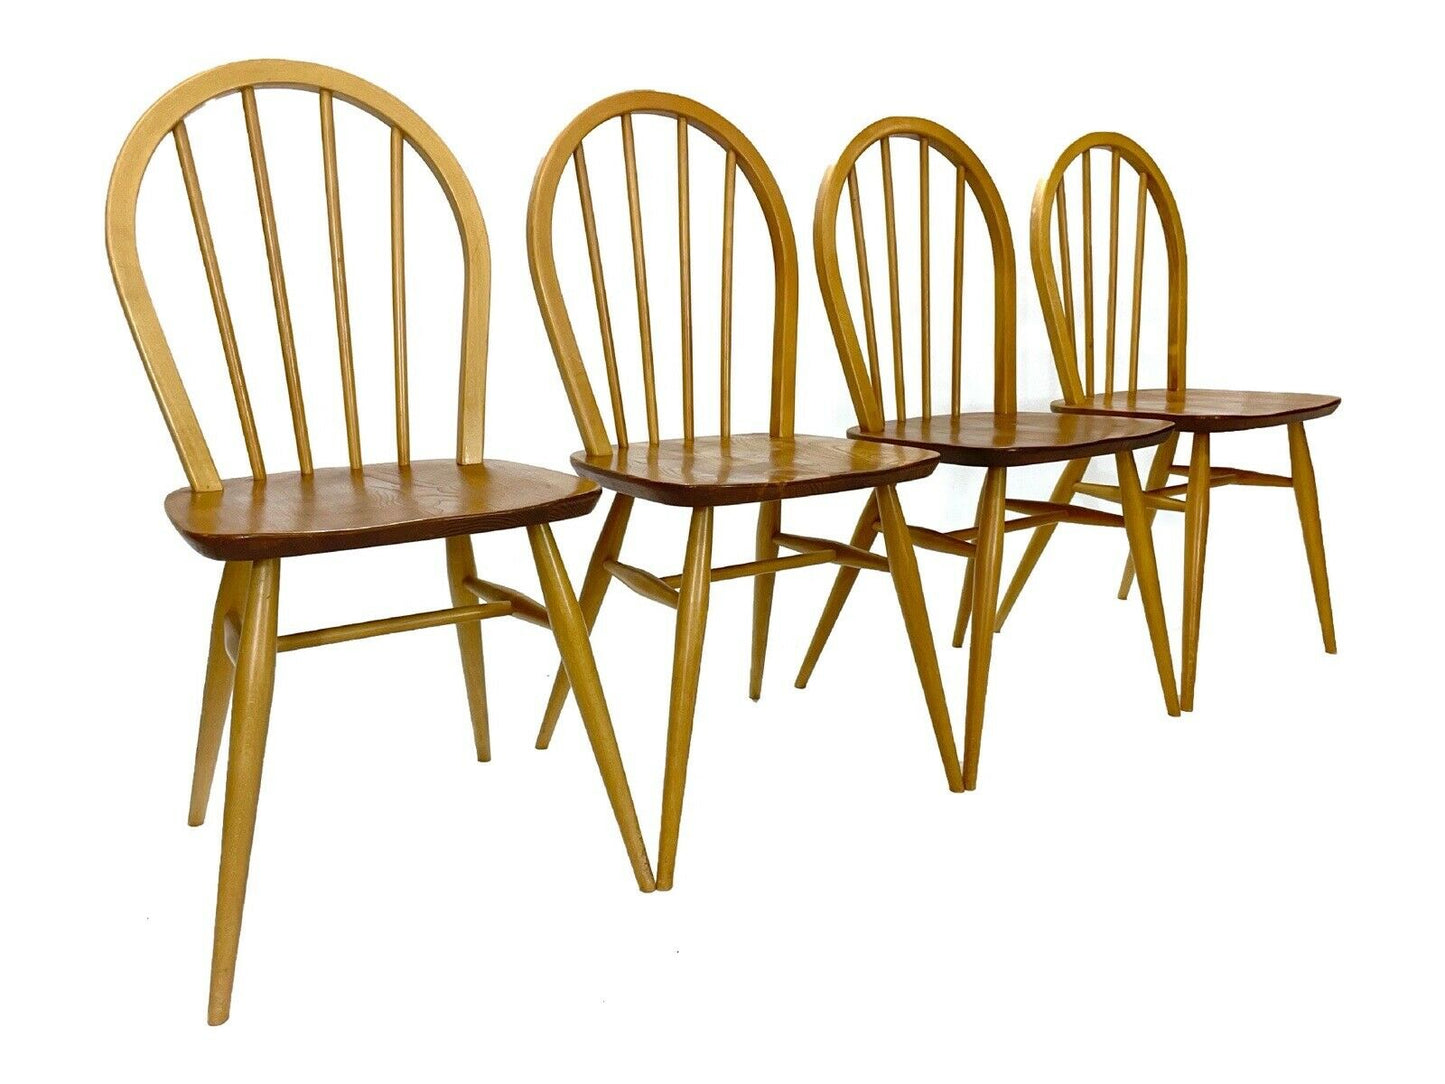 Set Of 4, Ercol 370 Windsor Chairs